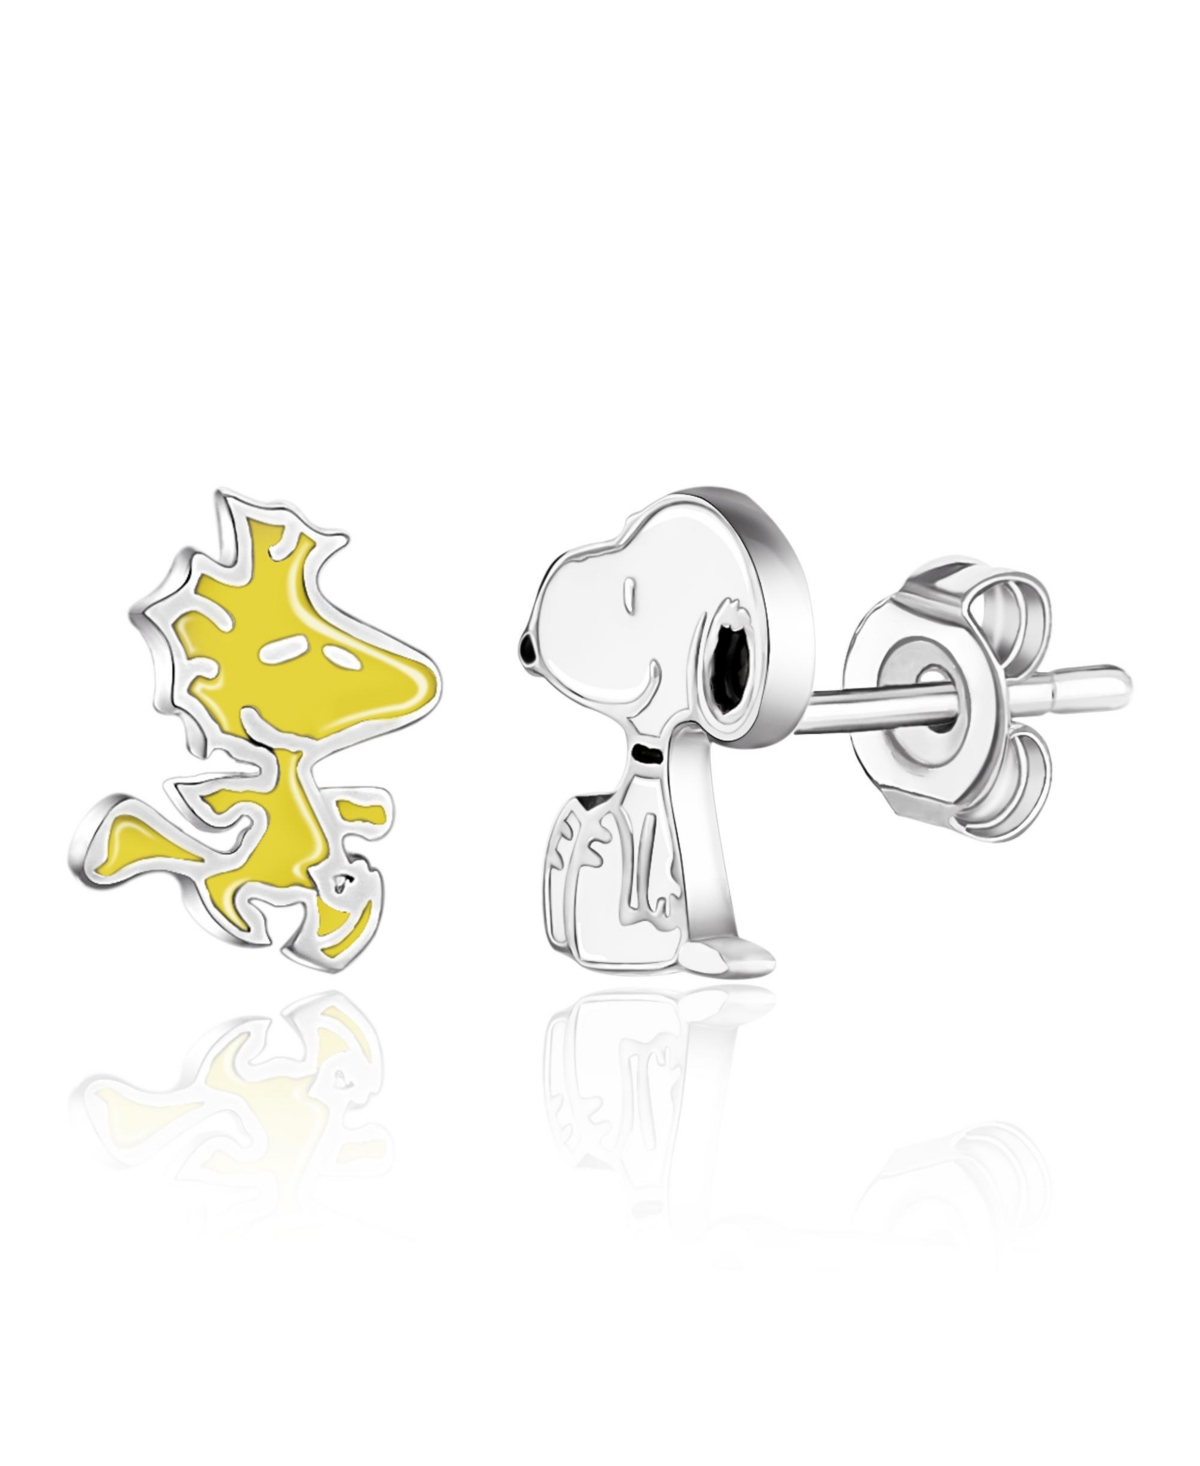 Silver Plated Snoopy and Woodstock Mismatch Stud Earrings - Silver, white, yellow